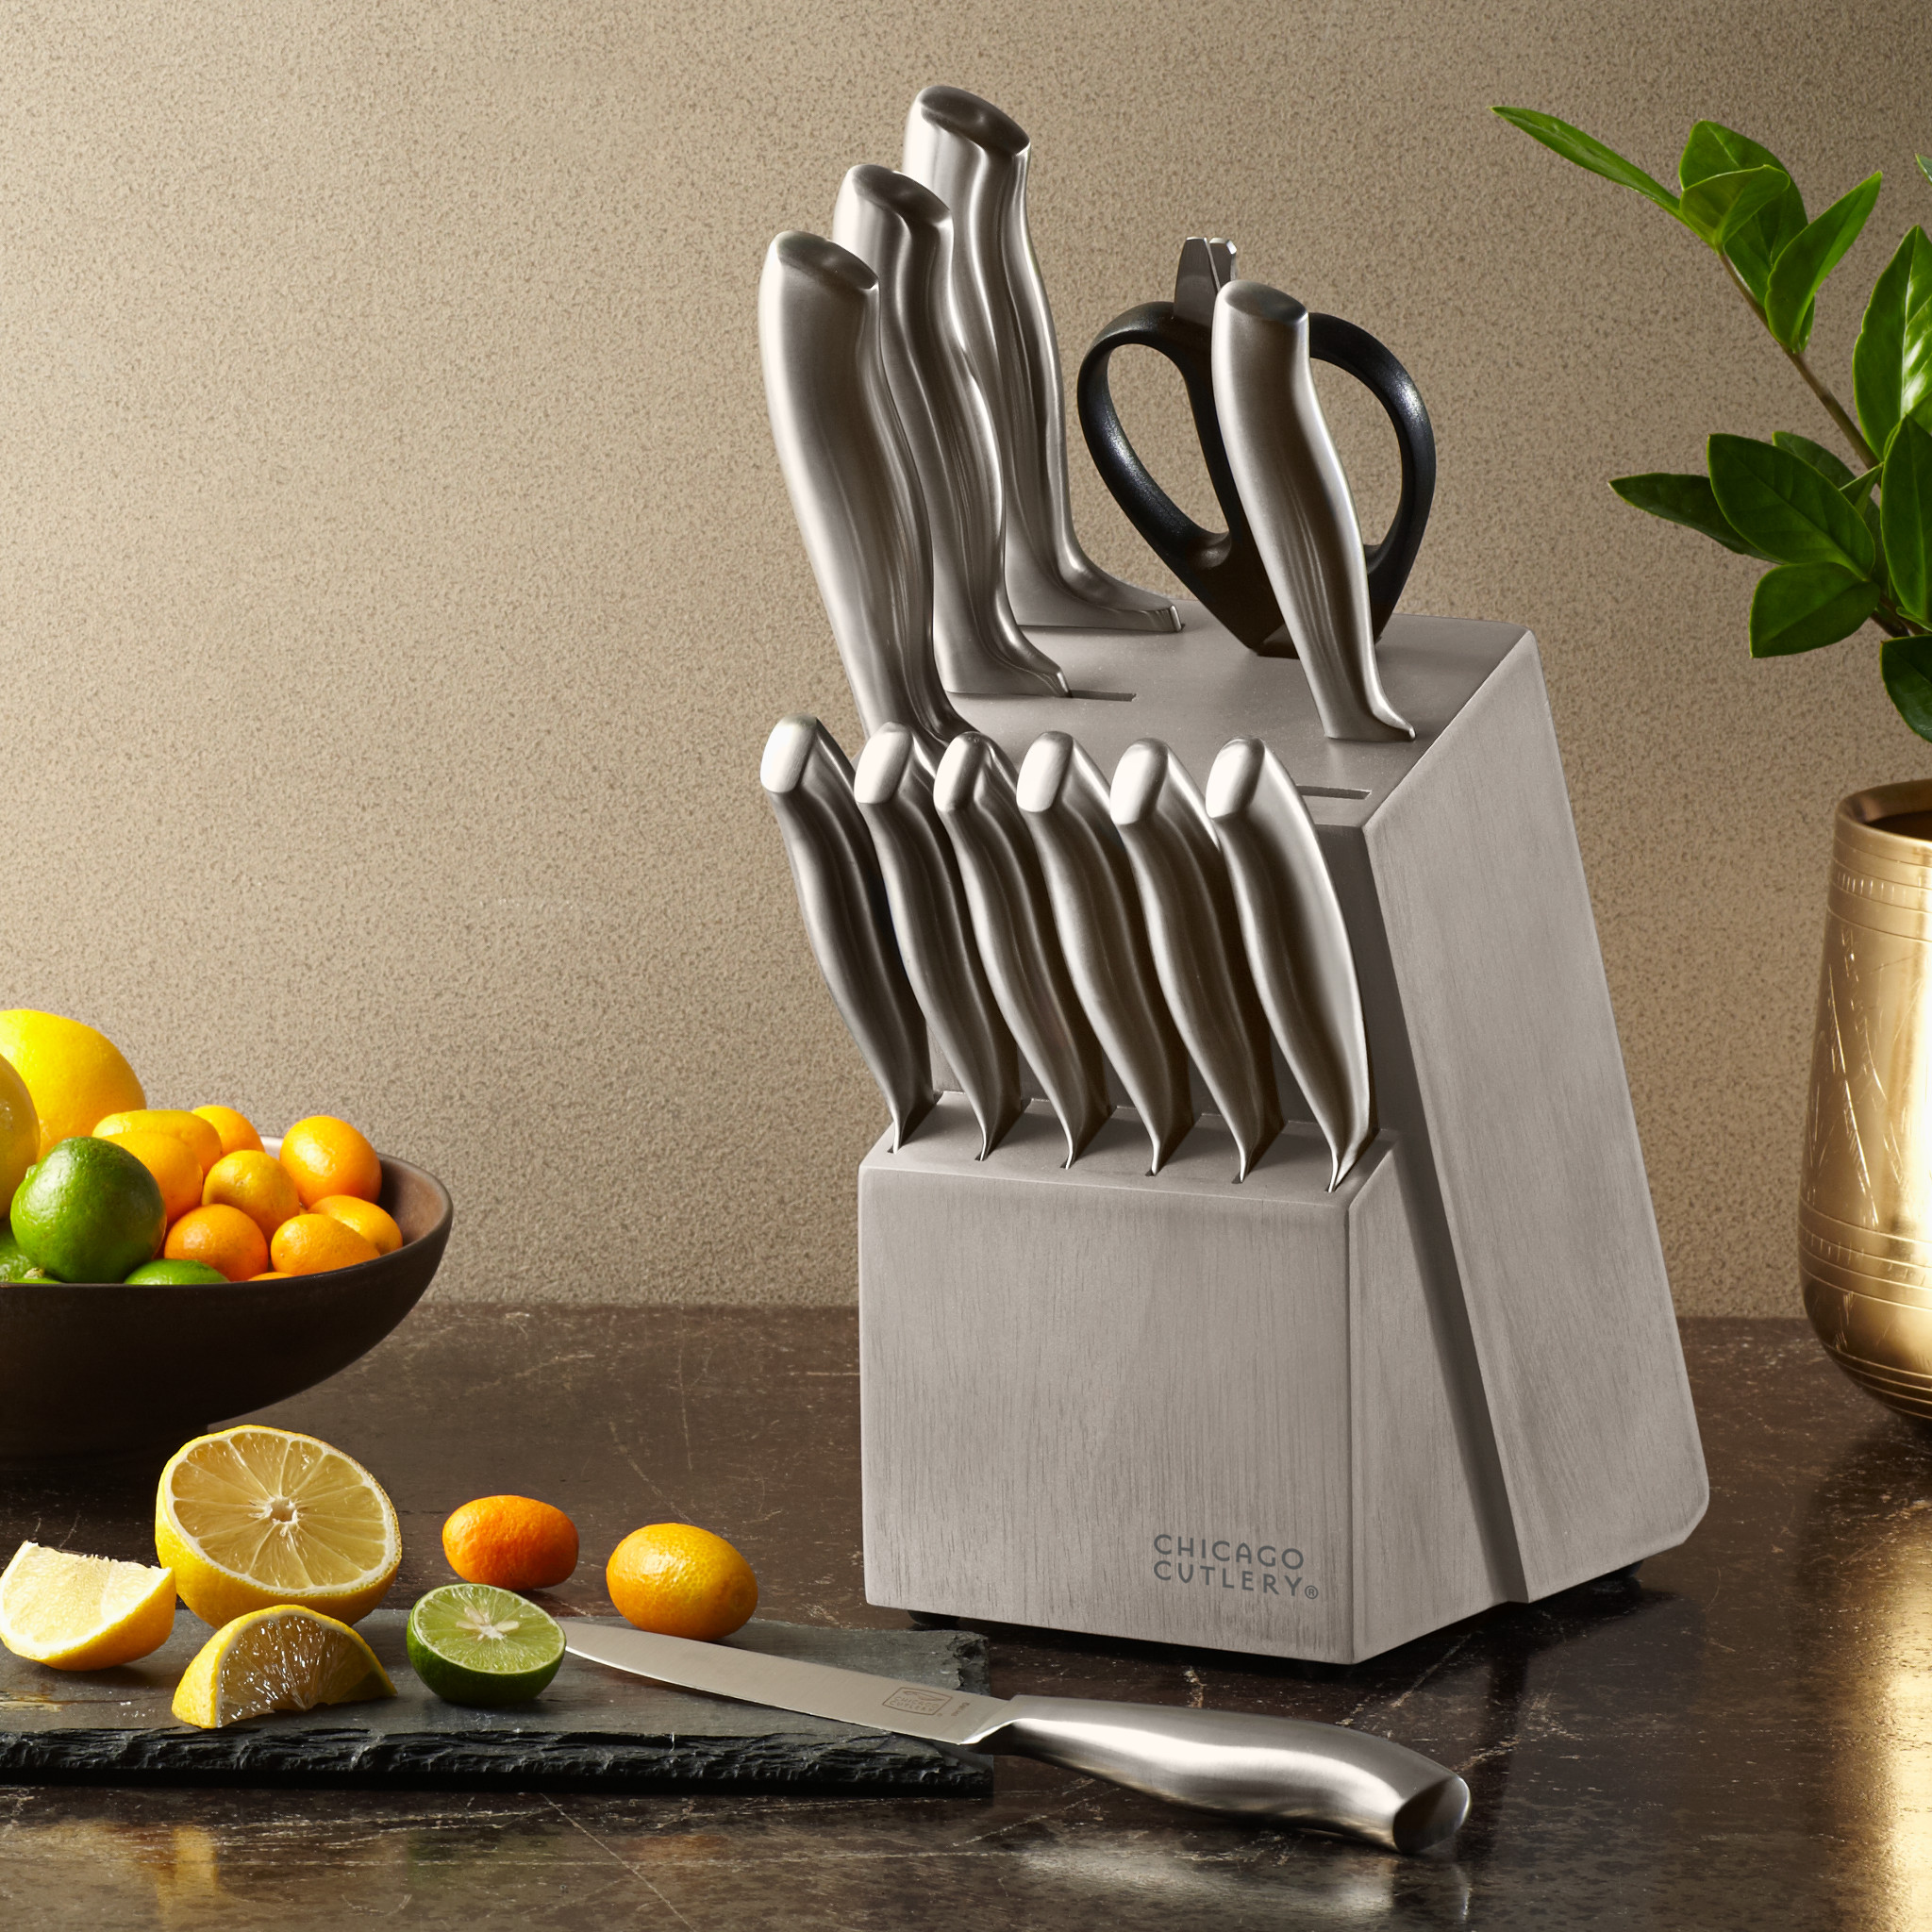 Chicago Cutlery Elston 16pc Knife Set with Block - Stainless Steel Blades,  Plastic Handles - Includes Bread Knife, Chef Knife, Paring Knife, Shears in  the Cutlery department at